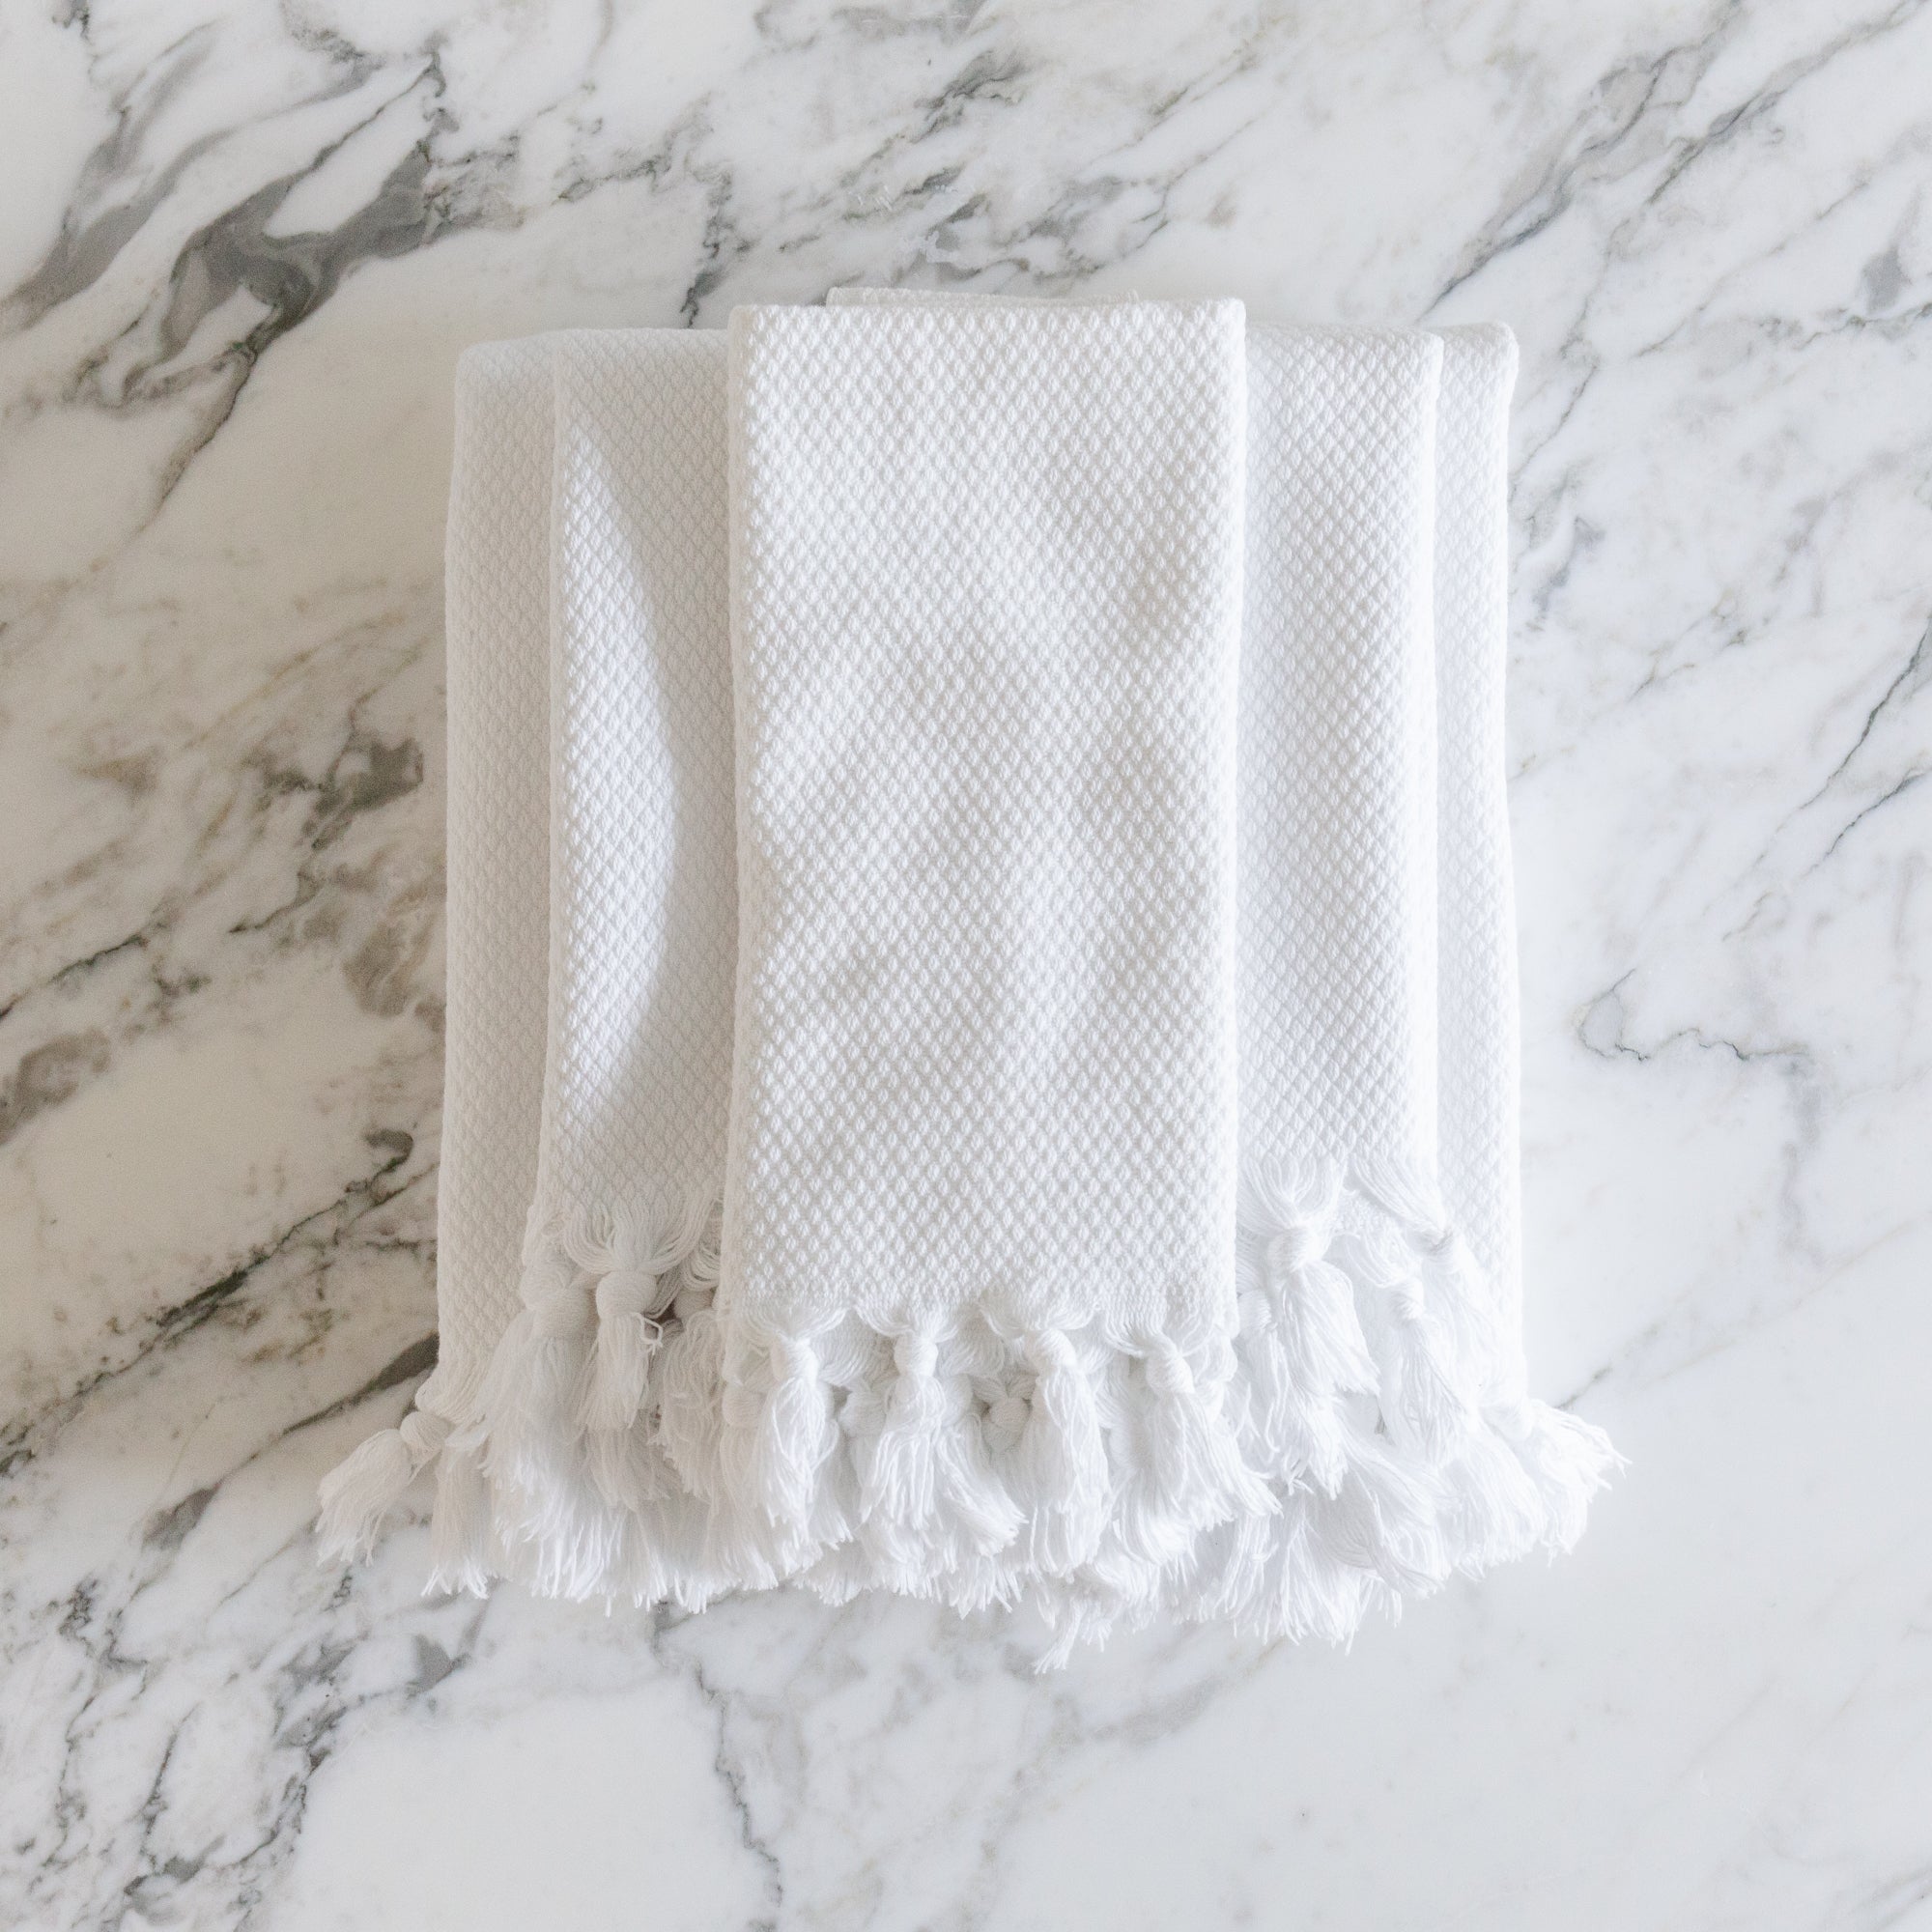 These Turkish Cotton Bath Towels Are 40% Off at